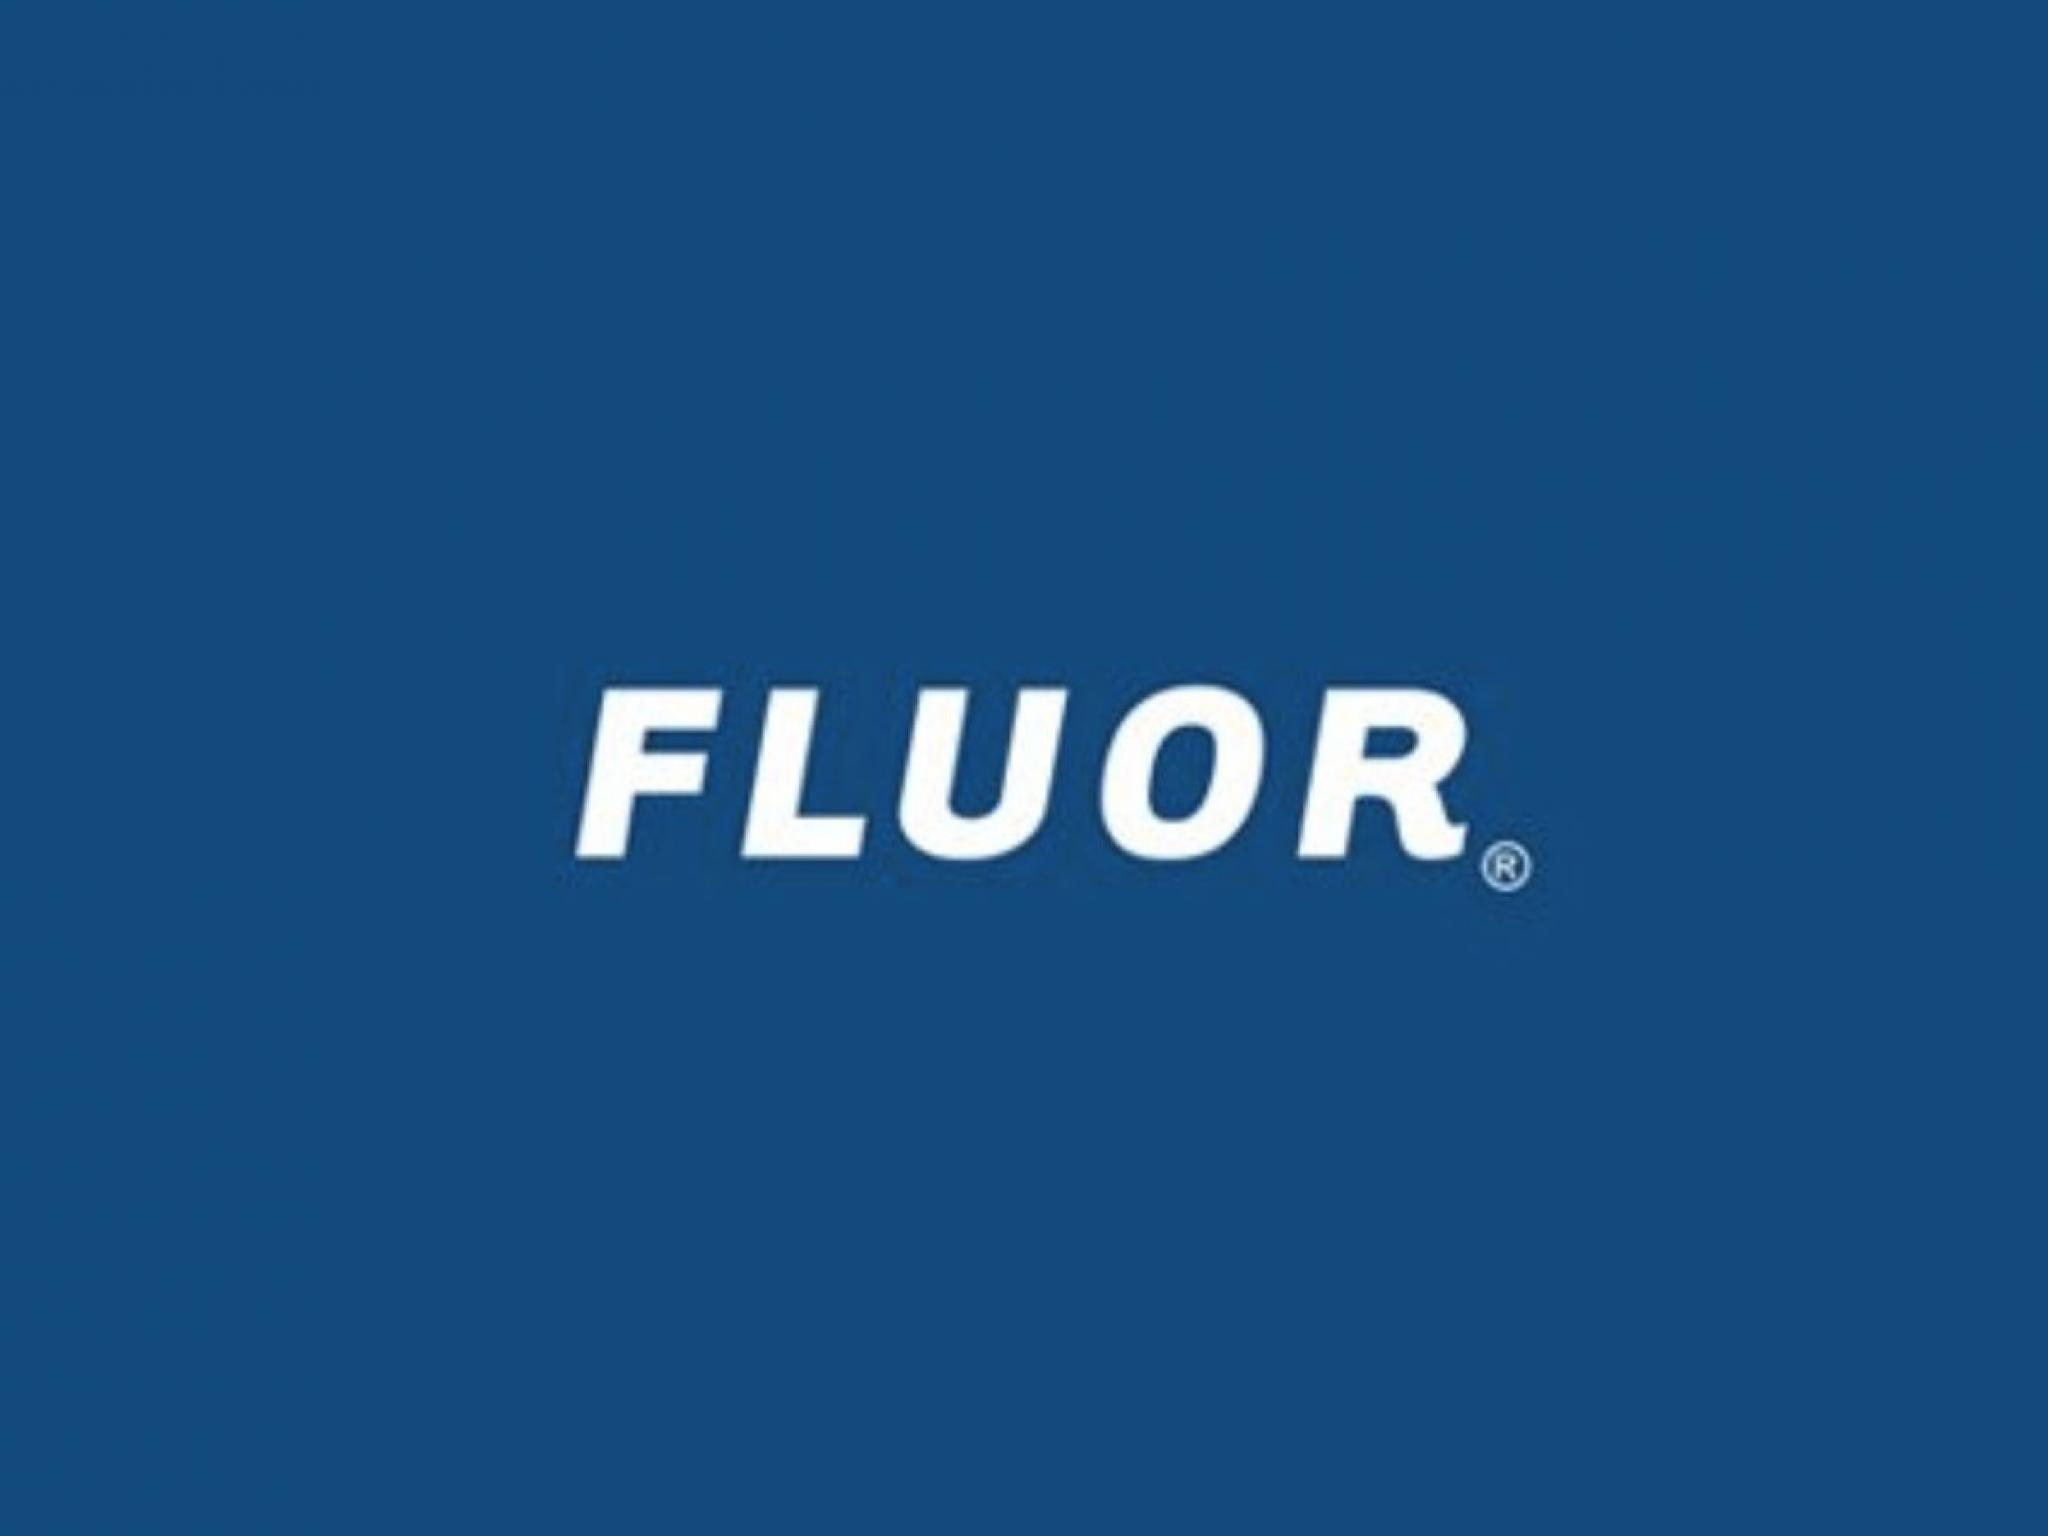  why-fluor-shares-are-trading-lower-by-around-8-here-are-other-stocks-moving-in-tuesdays-mid-day-session 